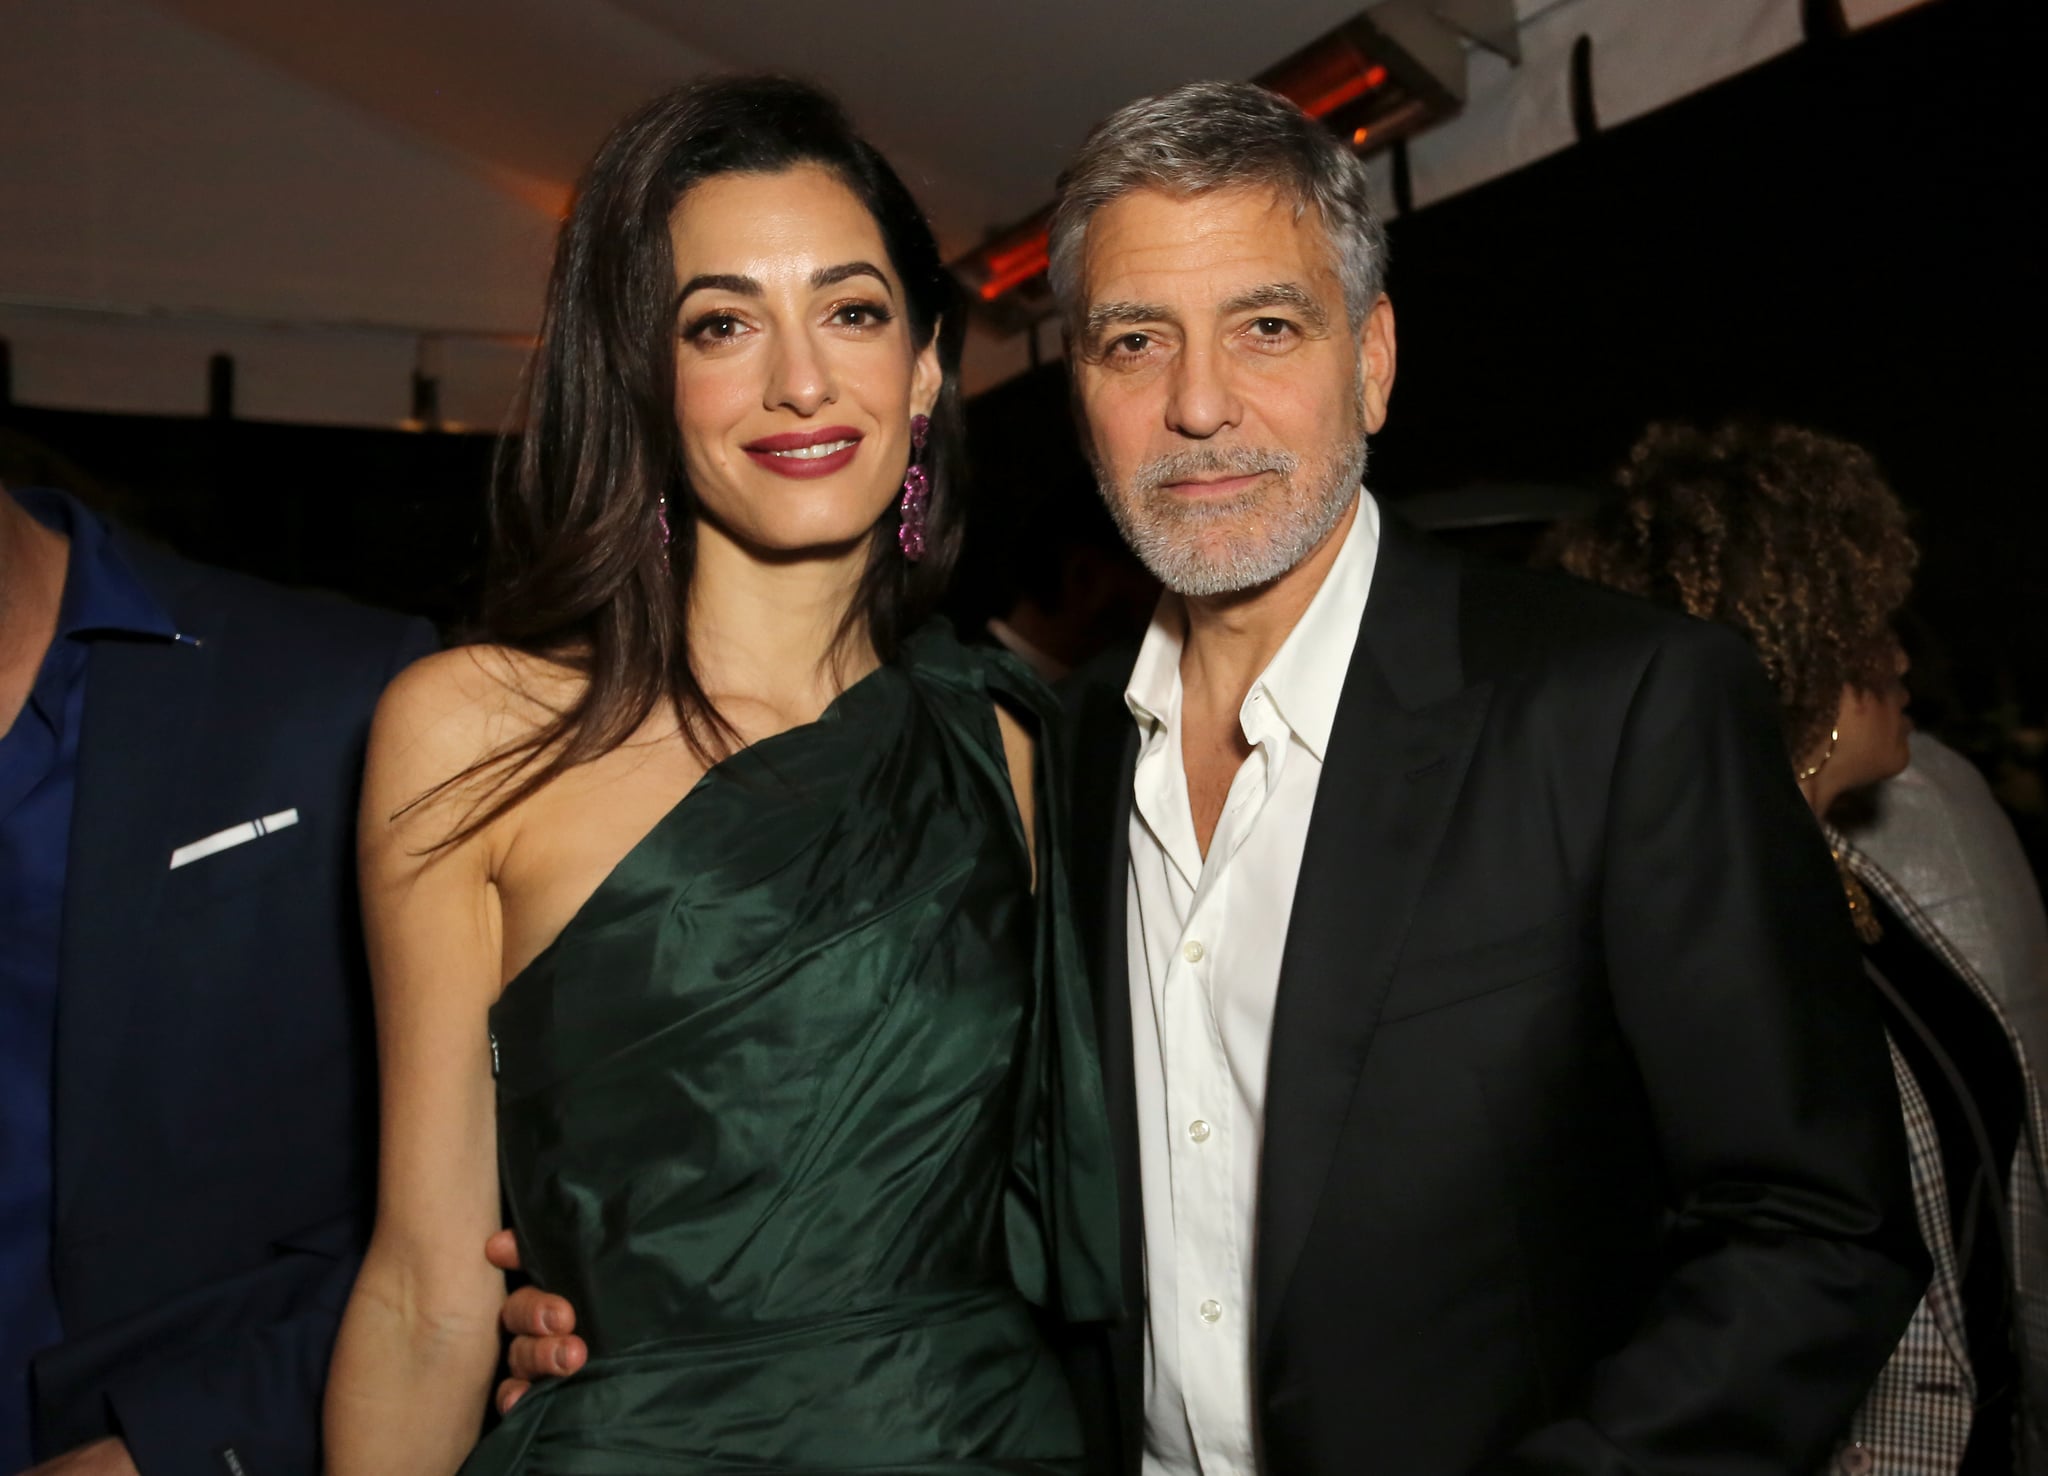 HOLLYWOOD, CALIFORNIA - MAY 07: (L-R) Amal Clooney and George Clooney attends the premiere of Hulu's